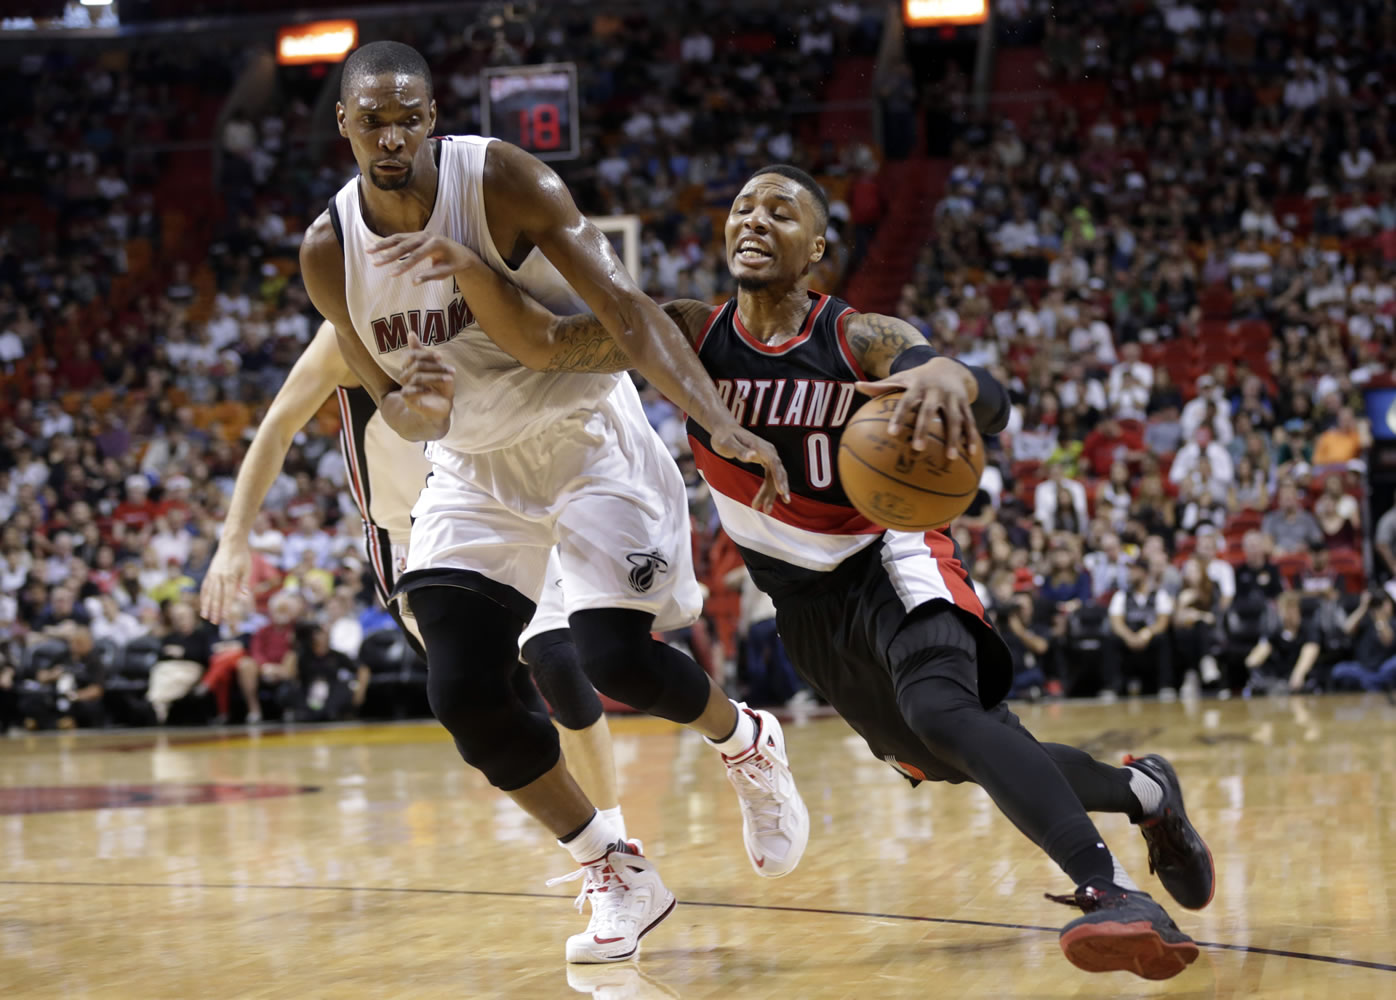 Portland Trail Blazers' Damian Lillard (0) is fouled by Miami Heat's Chris Bosh, left, in the first half of an NBA basketball game, Sunday, Dec. 20, 2015, in Miami.